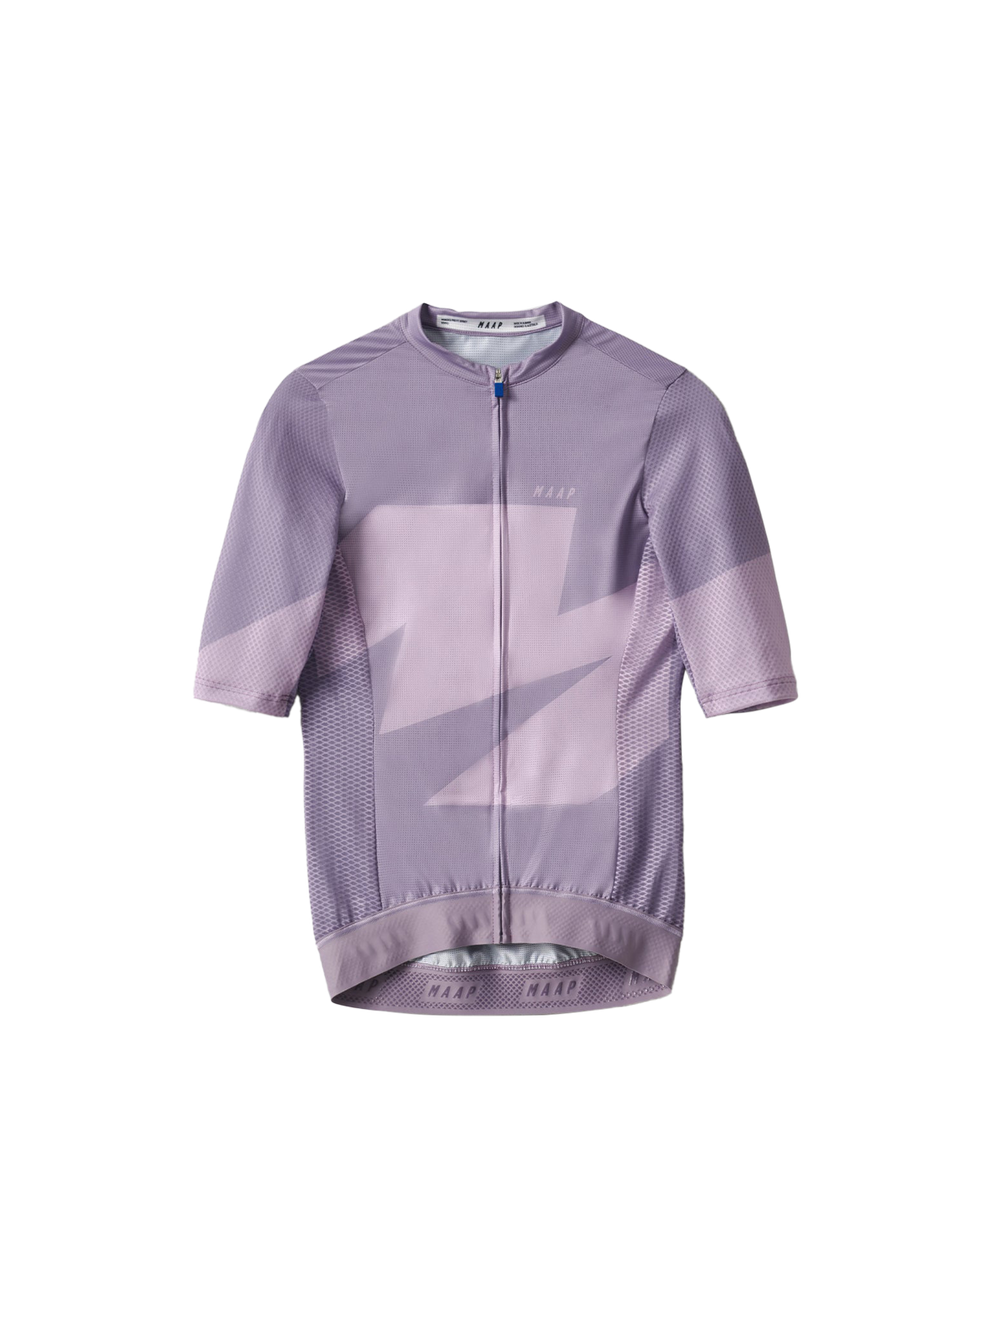 Product Image for Women's Evolve Pro Air Jersey